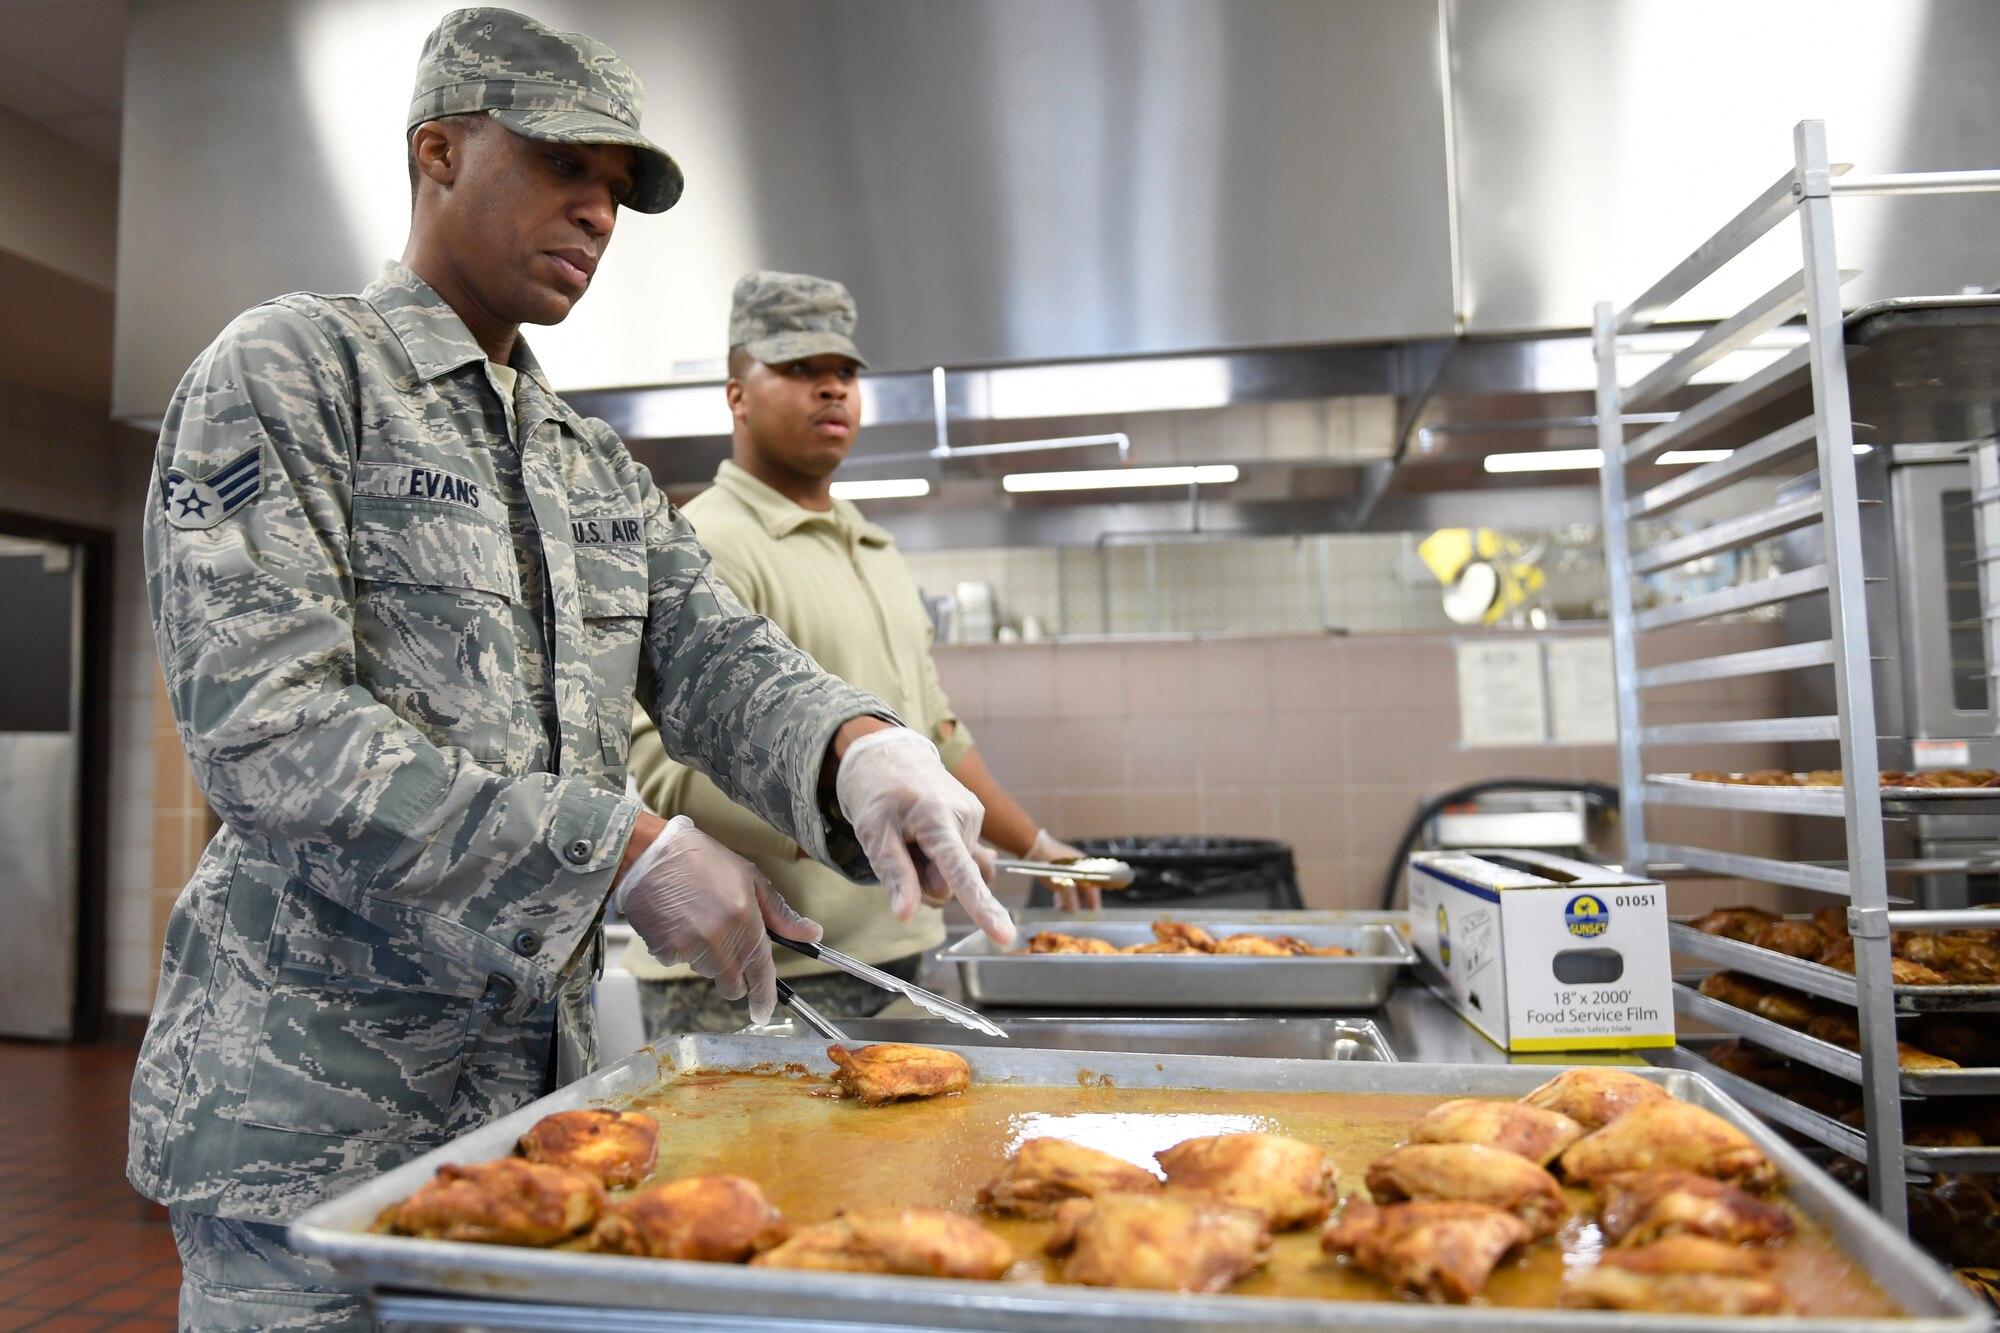 U.S. Air Force Senior Airman Derek Evans (left) Senior Airman Deontre Barrett (right), 145th Force Support Squadron, prepare cooked chicken to be served for lunch in the dining facility during drill weekend at the North Carolina Air National Guard Base, Charlotte Douglas International Airport, Jan. 12, 2019. Food services Airmen from the North Carolina Air National Guard train members from the Niagara Falls Air Reserve Station, New York, on full-service kitchen operations in preparation for the upcoming Air Force active duty and reserve Hennessy Award competition.